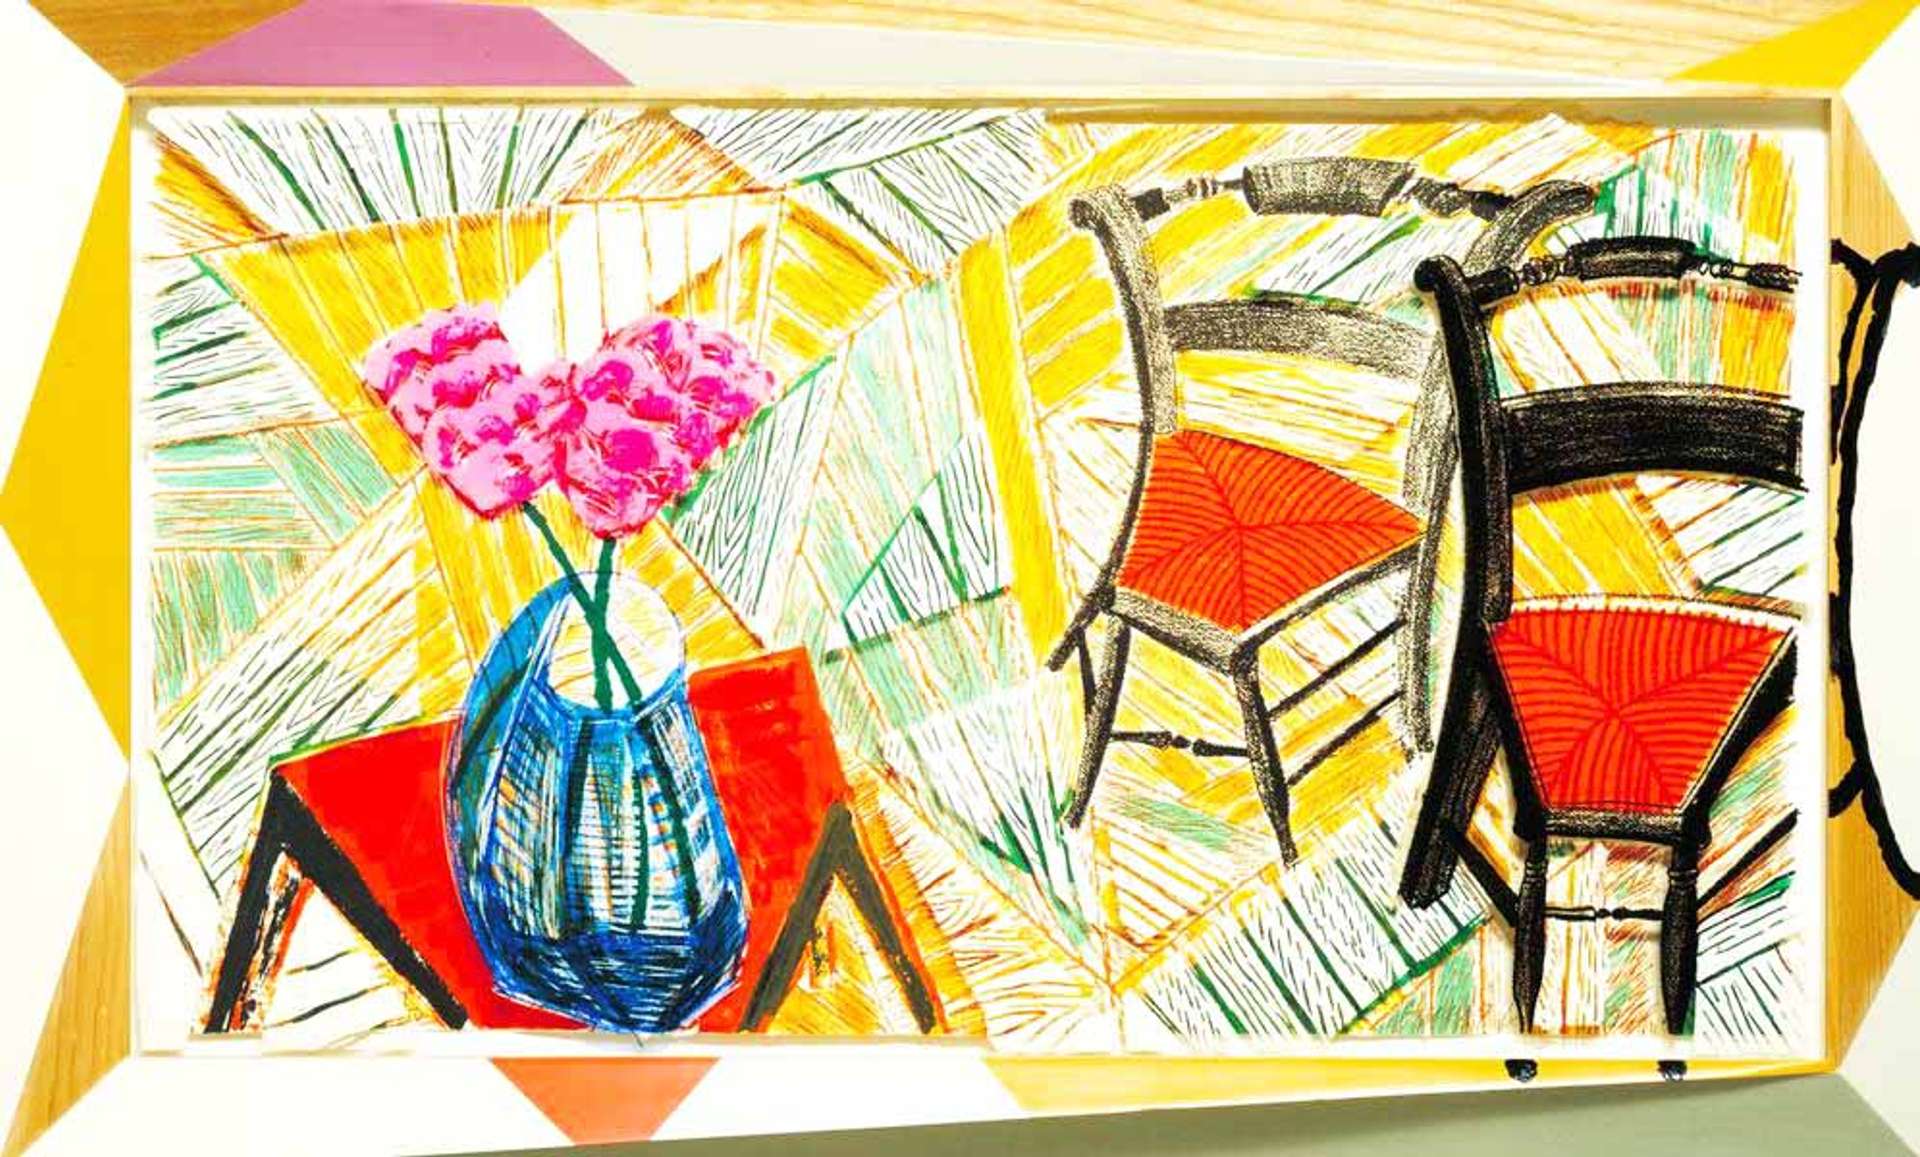 David Hockney's Walking Past Two Chairs. A lithographic print of two black chairs with red cushions next to a blue vase filled with pink flowers.